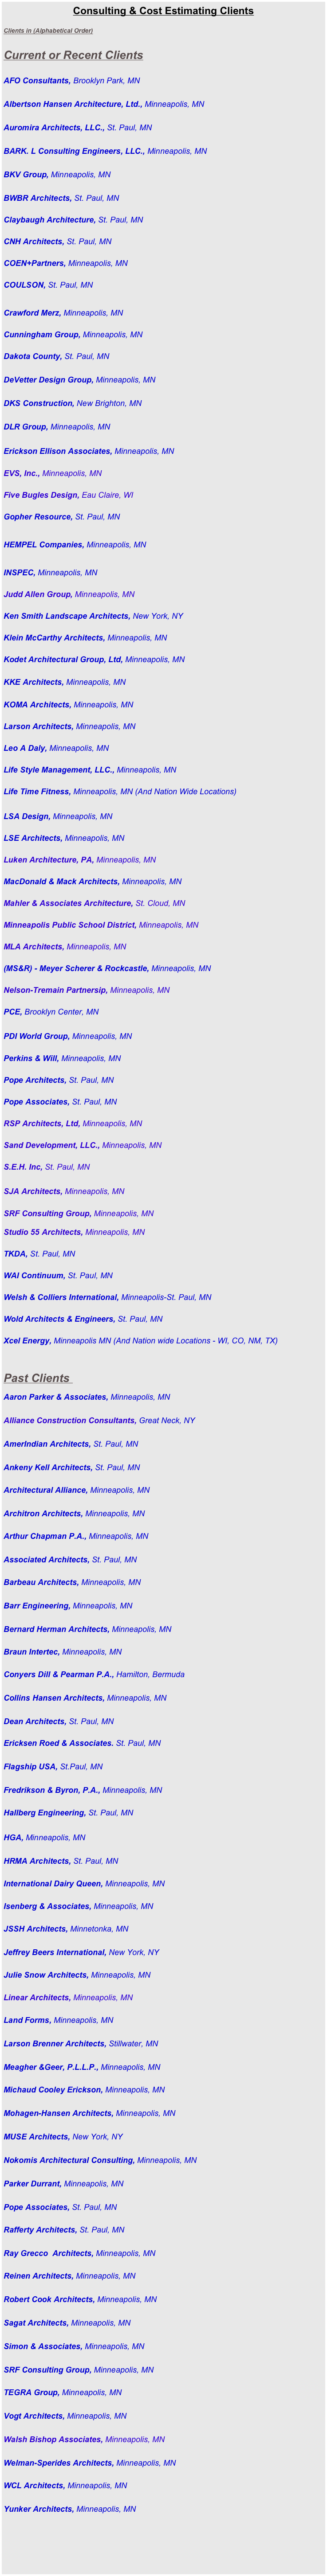 Consulting & Cost Estimating Clients

Clients in (Alphabetical Order)                      


Current or Recent Clients


AFO Consultants, Brooklyn Park, MN


Albertson Hansen Architecture, Ltd., Minneapolis, MN  


Auromira Architects, LLC., St. Paul, MN


BARK. L Consulting Engineers, LLC., Minneapolis, MN


BKV Group, Minneapolis, MN  

     
BWBR Architects, St. Paul, MN  
         
Claybaugh Architecture, St. Paul, MN  
        
CNH Architects, St. Paul, MN   
 
COEN+Partners, Minneapolis, MN
   
COULSON, St. Paul, MN 


Crawford Merz, Minneapolis, MN
      
Cunningham Group, Minneapolis, MN         

            
Dakota County, St. Paul, MN


DeVetter Design Group, Minneapolis, MN


DKS Construction, New Brighton, MN


DLR Group, Minneapolis, MN  

            
Erickson Ellison Associates, Minneapolis, MN   
        
EVS, Inc., Minneapolis, MN  
 
Five Bugles Design, Eau Claire, WI
                
Gopher Resource, St. Paul, MN 


HEMPEL Companies, Minneapolis, MN


INSPEC, Minneapolis, MN 
        
Judd Allen Group, Minneapolis, MN  
      
Ken Smith Landscape Architects, New York, NY


Klein McCarthy Architects, Minneapolis, MN

  
Kodet Architectural Group, Ltd, Minneapolis, MN  
           

KKE Architects, Minneapolis, MN  
            

KOMA Architects, Minneapolis, MN
       
Larson Architects, Minneapolis, MN  
   
Leo A Daly, Minneapolis, MN

Life Style Management, LLC., Minneapolis, MN 

Life Time Fitness, Minneapolis, MN (And Nation Wide Locations)

   
LSA Design, Minneapolis, MN
  

LSE Architects, Minneapolis, MN


Luken Architecture, PA, Minneapolis, MN  
       
MacDonald & Mack Architects, Minneapolis, MN

          
Mahler & Associates Architecture, St. Cloud, MN  
      
Minneapolis Public School District, Minneapolis, MN


MLA Architects, Minneapolis, MN


(MS&R) - Meyer Scherer & Rockcastle, Minneapolis, MN  
                   

Nelson-Tremain Partnersip, Minneapolis, MN  
  
PCE, Brooklyn Center, MN
     
PDI World Group, Minneapolis, MN           


Perkins & Will, Minneapolis, MN  

Pope Architects, St. Paul, MN

            
Pope Associates, St. Paul, MN

            
RSP Architects, Ltd, Minneapolis, MN  
   
Sand Development, LLC., Minneapolis, MN
    
S.E.H. Inc, St. Paul, MN  
       
SJA Architects, Minneapolis, MN                 


SRF Consulting Group, Minneapolis, MN

Studio 55 Architects, Minneapolis, MN 
     
TKDA, St. Paul, MN   


WAI Continuum, St. Paul, MN


Welsh & Colliers International, Minneapolis-St. Paul, MN


Wold Architects & Engineers, St. Paul, MN


Xcel Energy, Minneapolis MN (And Nation wide Locations - WI, CO, NM, TX) 
     


Past Clients 

Aaron Parker & Associates, Minneapolis, MN


Alliance Construction Consultants, Great Neck, NY


AmerIndian Architects, St. Paul, MN


Ankeny Kell Architects, St. Paul, MN


Architectural Alliance, Minneapolis, MN


Architron Architects, Minneapolis, MN


Arthur Chapman P.A., Minneapolis, MN


Associated Architects, St. Paul, MN


Barbeau Architects, Minneapolis, MN


Barr Engineering, Minneapolis, MN  


Bernard Herman Architects, Minneapolis, MN


Braun Intertec, Minneapolis, MN


Conyers Dill & Pearman P.A., Hamilton, Bermuda


Collins Hansen Architects, Minneapolis, MN


Dean Architects, St. Paul, MN

 
Ericksen Roed & Associates. St. Paul, MN


Flagship USA, St.Paul, MN


Fredrikson & Byron, P.A., Minneapolis, MN


Hallberg Engineering, St. Paul, MN


HGA, Minneapolis, MN


HRMA Architects, St. Paul, MN


International Dairy Queen, Minneapolis, MN


Isenberg & Associates, Minneapolis, MN


JSSH Architects, Minnetonka, MN


Jeffrey Beers International, New York, NY


Julie Snow Architects, Minneapolis, MN


Linear Architects, Minneapolis, MN


Land Forms, Minneapolis, MN


Larson Brenner Architects, Stillwater, MN


Meagher &Geer, P.L.L.P., Minneapolis, MN


Michaud Cooley Erickson, Minneapolis, MN


Mohagen-Hansen Architects, Minneapolis, MN


MUSE Architects, New York, NY


Nokomis Architectural Consulting, Minneapolis, MN


Parker Durrant, Minneapolis, MN


Pope Associates, St. Paul, MN


Rafferty Architects, St. Paul, MN


Ray Grecco  Architects, Minneapolis, MN


Reinen Architects, Minneapolis, MN


Robert Cook Architects, Minneapolis, MN


Sagat Architects, Minneapolis, MN


Simon & Associates, Minneapolis, MN


SRF Consulting Group, Minneapolis, MN


TEGRA Group, Minneapolis, MN


Vogt Architects, Minneapolis, MN


Walsh Bishop Associates, Minneapolis, MN


Welman-Sperides Architects, Minneapolis, MN


WCL Architects, Minneapolis, MN


Yunker Architects, Minneapolis, MN


